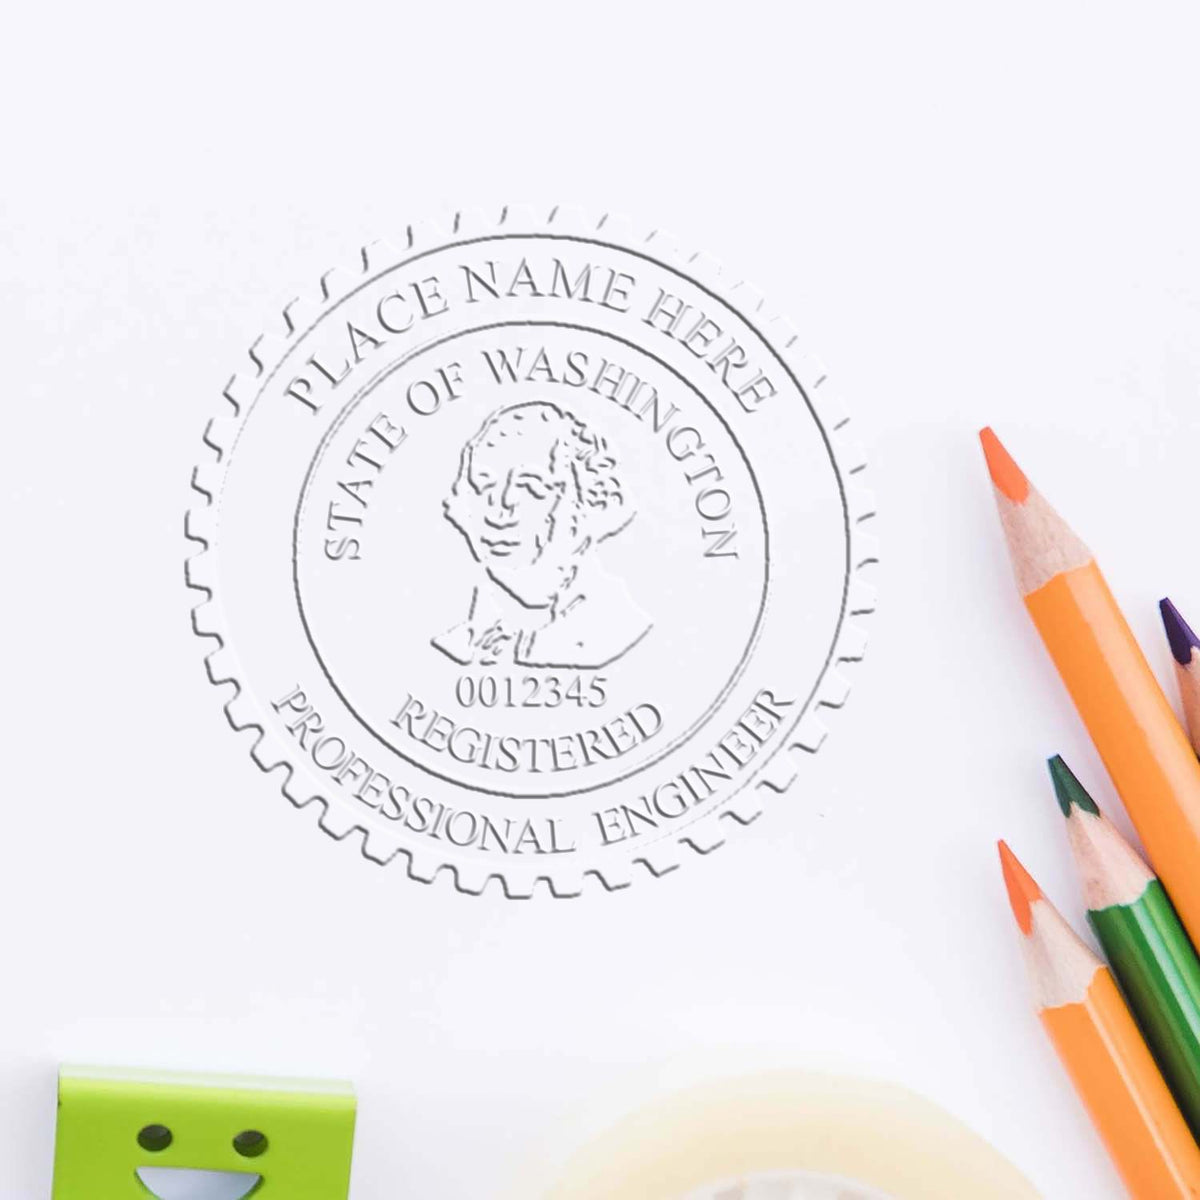 A stamped impression of the Washington Engineer Desk Seal in this stylish lifestyle photo, setting the tone for a unique and personalized product.